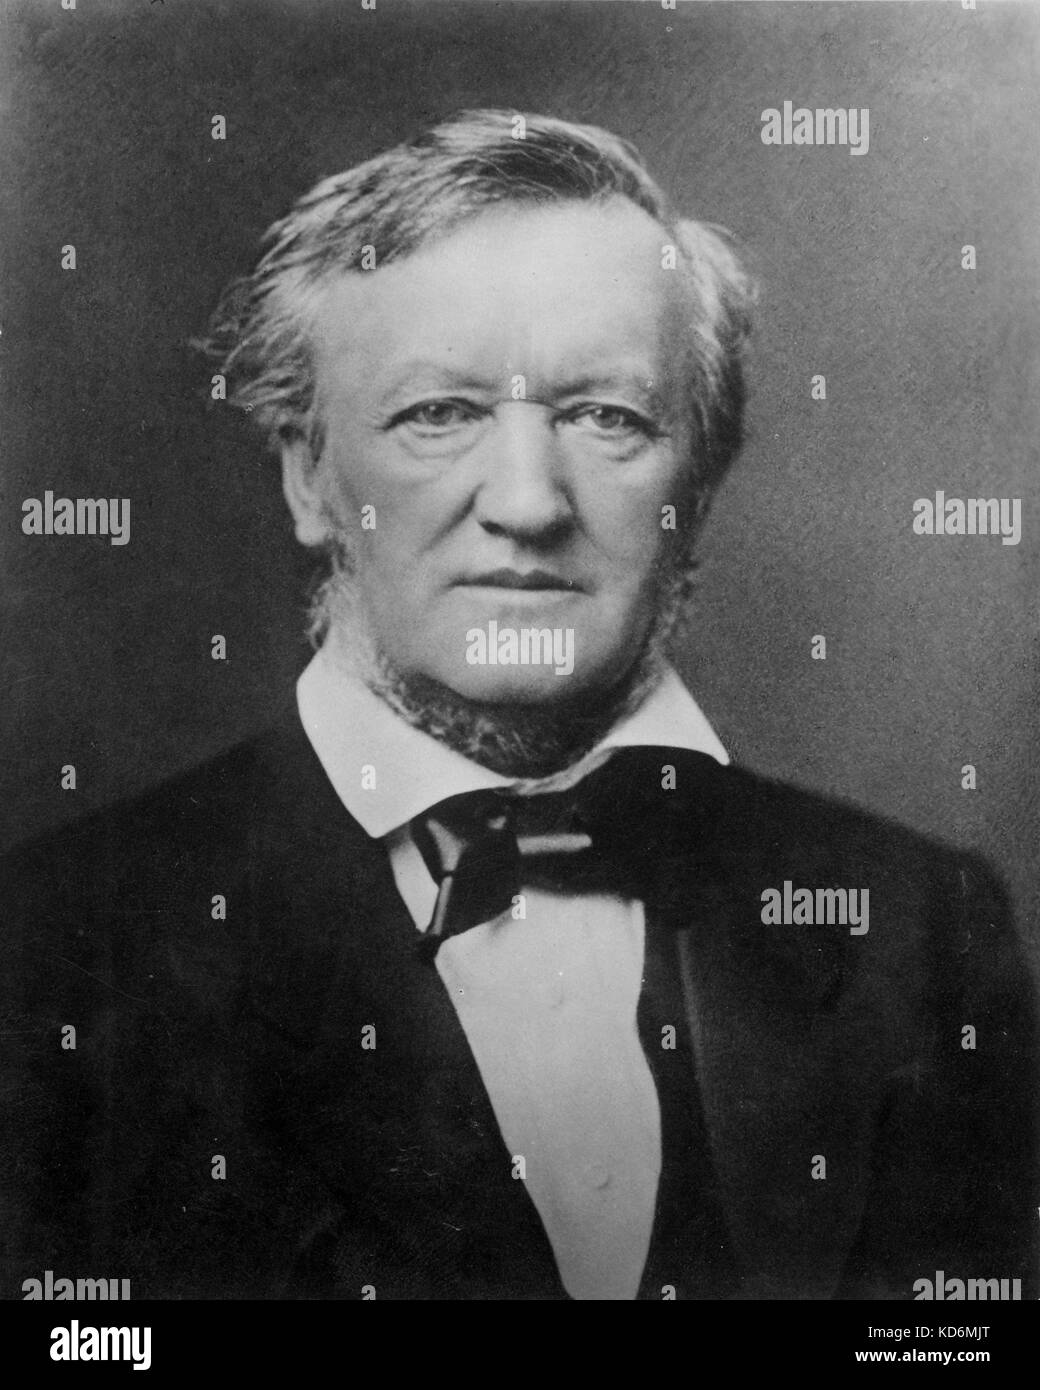 Richard Wagner in 1877. Portrait taken by Elliott and Fry, London. German composer & author. 22 May 1813 - 13 February 1883. Stock Photo